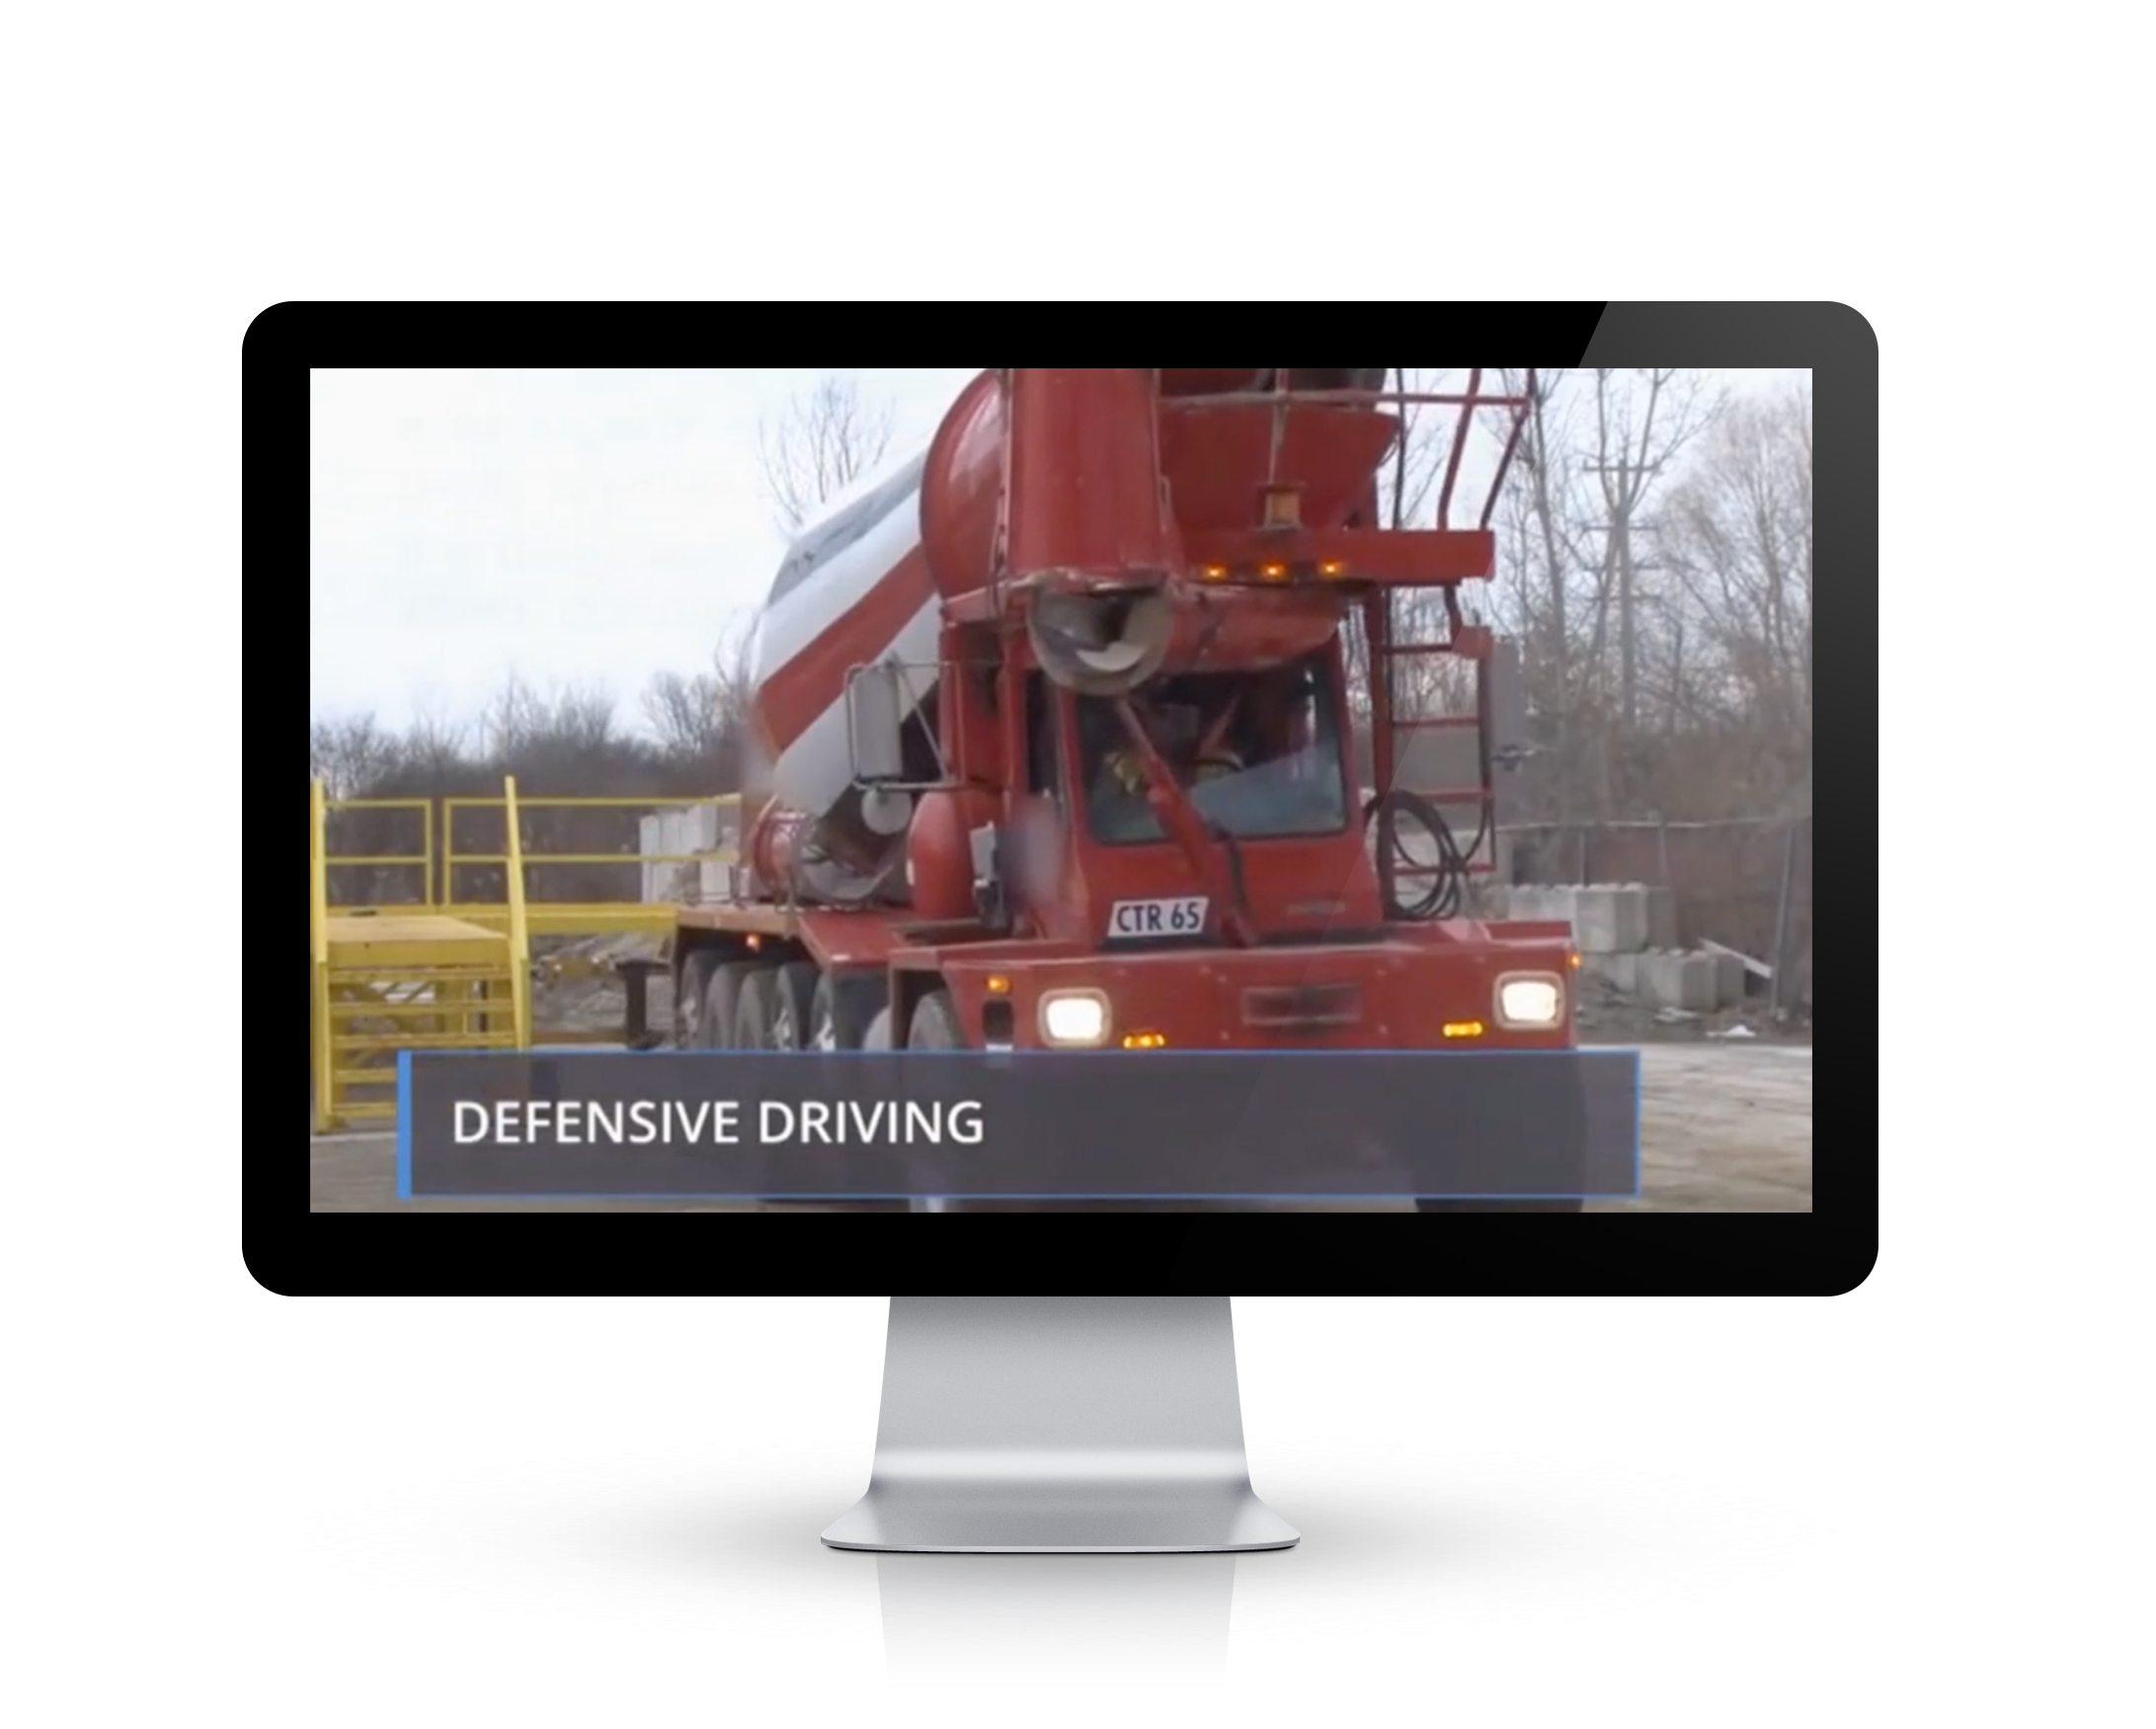 defensive driving ehs training still on a Video Base